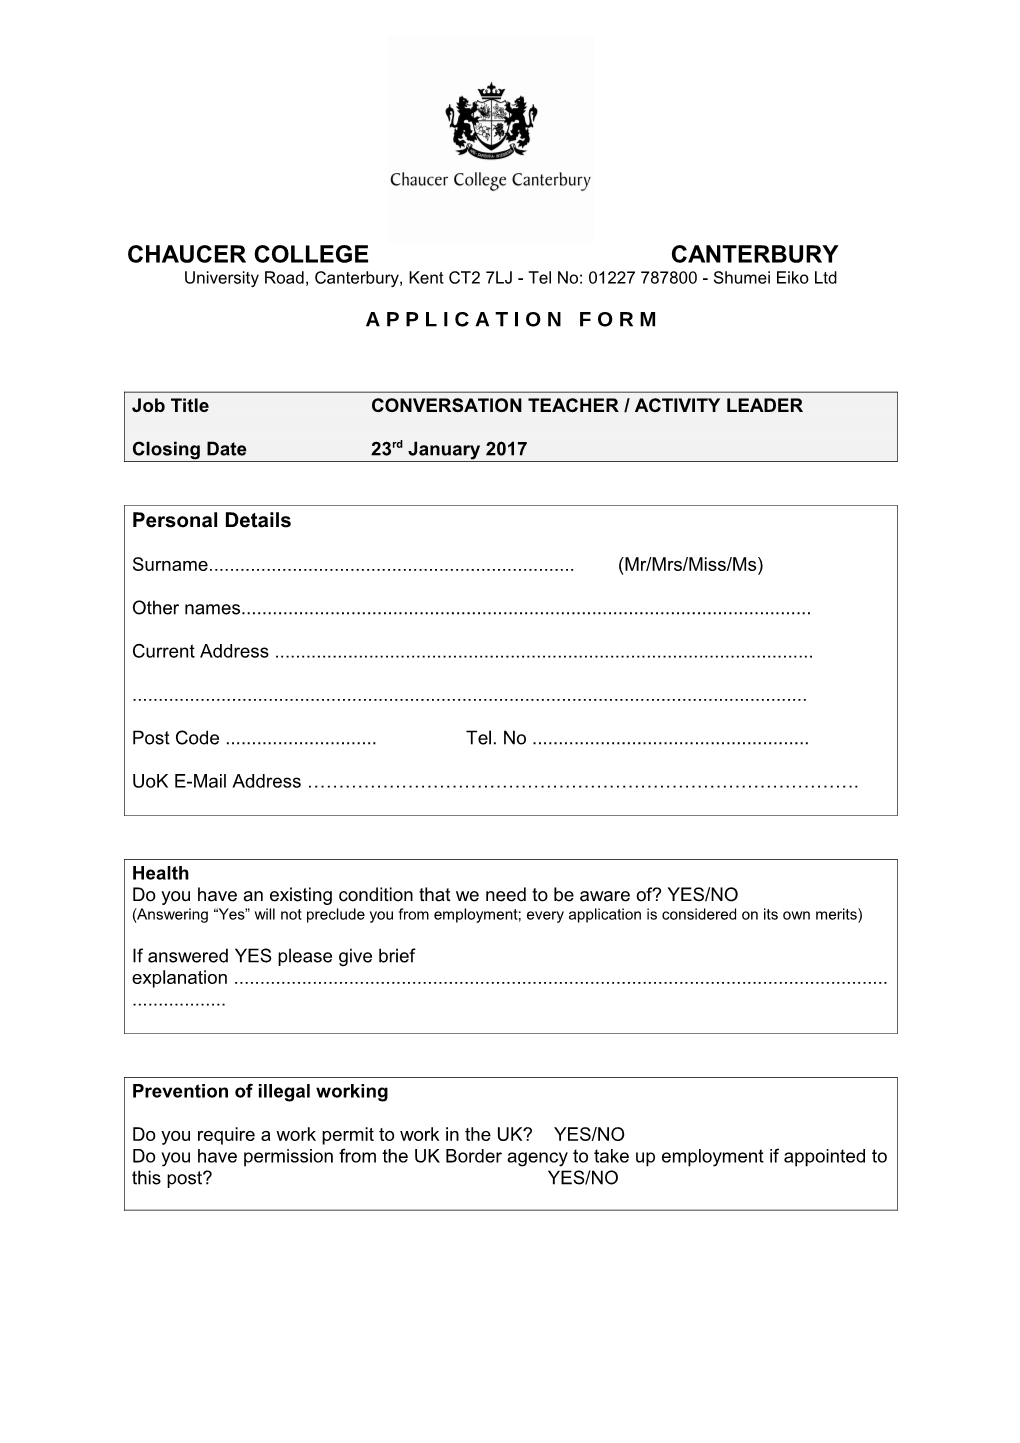 Chaucer College Canterbury